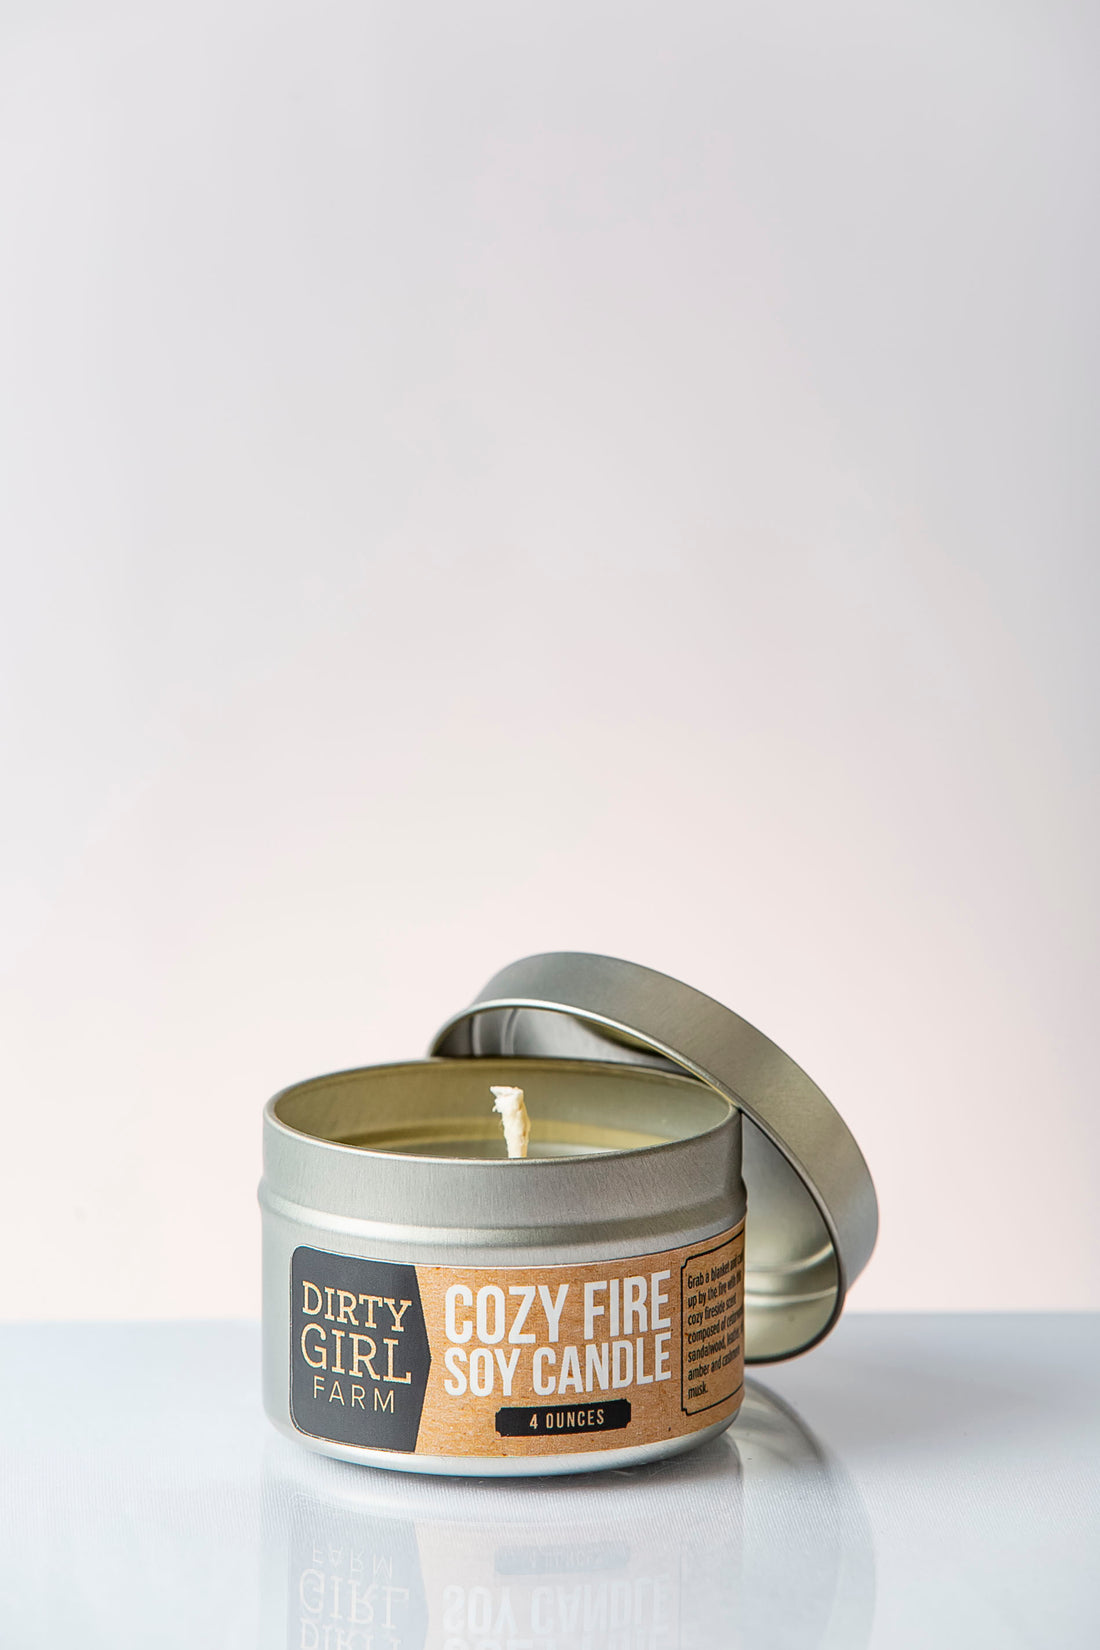 Dirty Girl Farm Cozy Fire Soy Candle